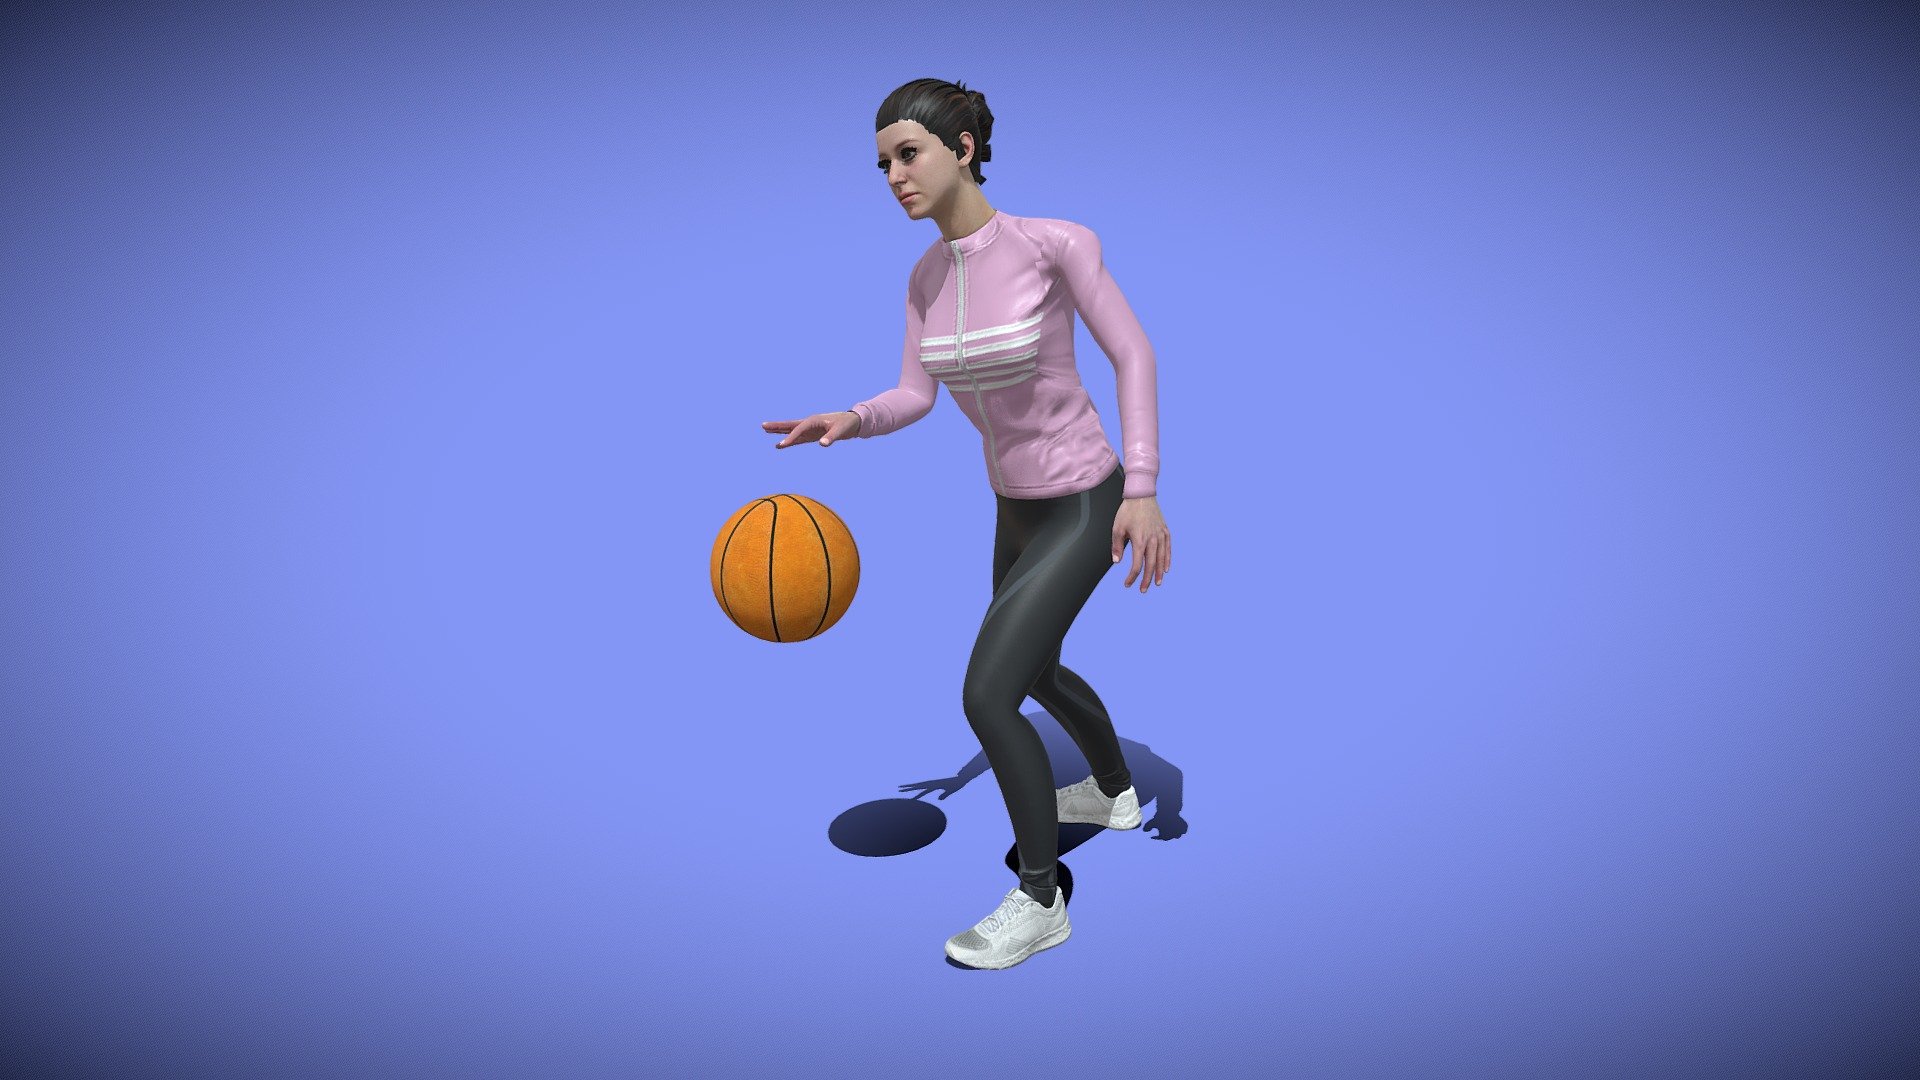 A woman bounces a basketball (dribble) in this looped animation at 30 frames per second.

See this 3D model in action, and more models like it, here in this collection of free augmeneted reality apps:

https://morpheusar.com/ - Looped Animation of Woman Bouncing Basketball - 3D model by LasquetiSpice 3d model